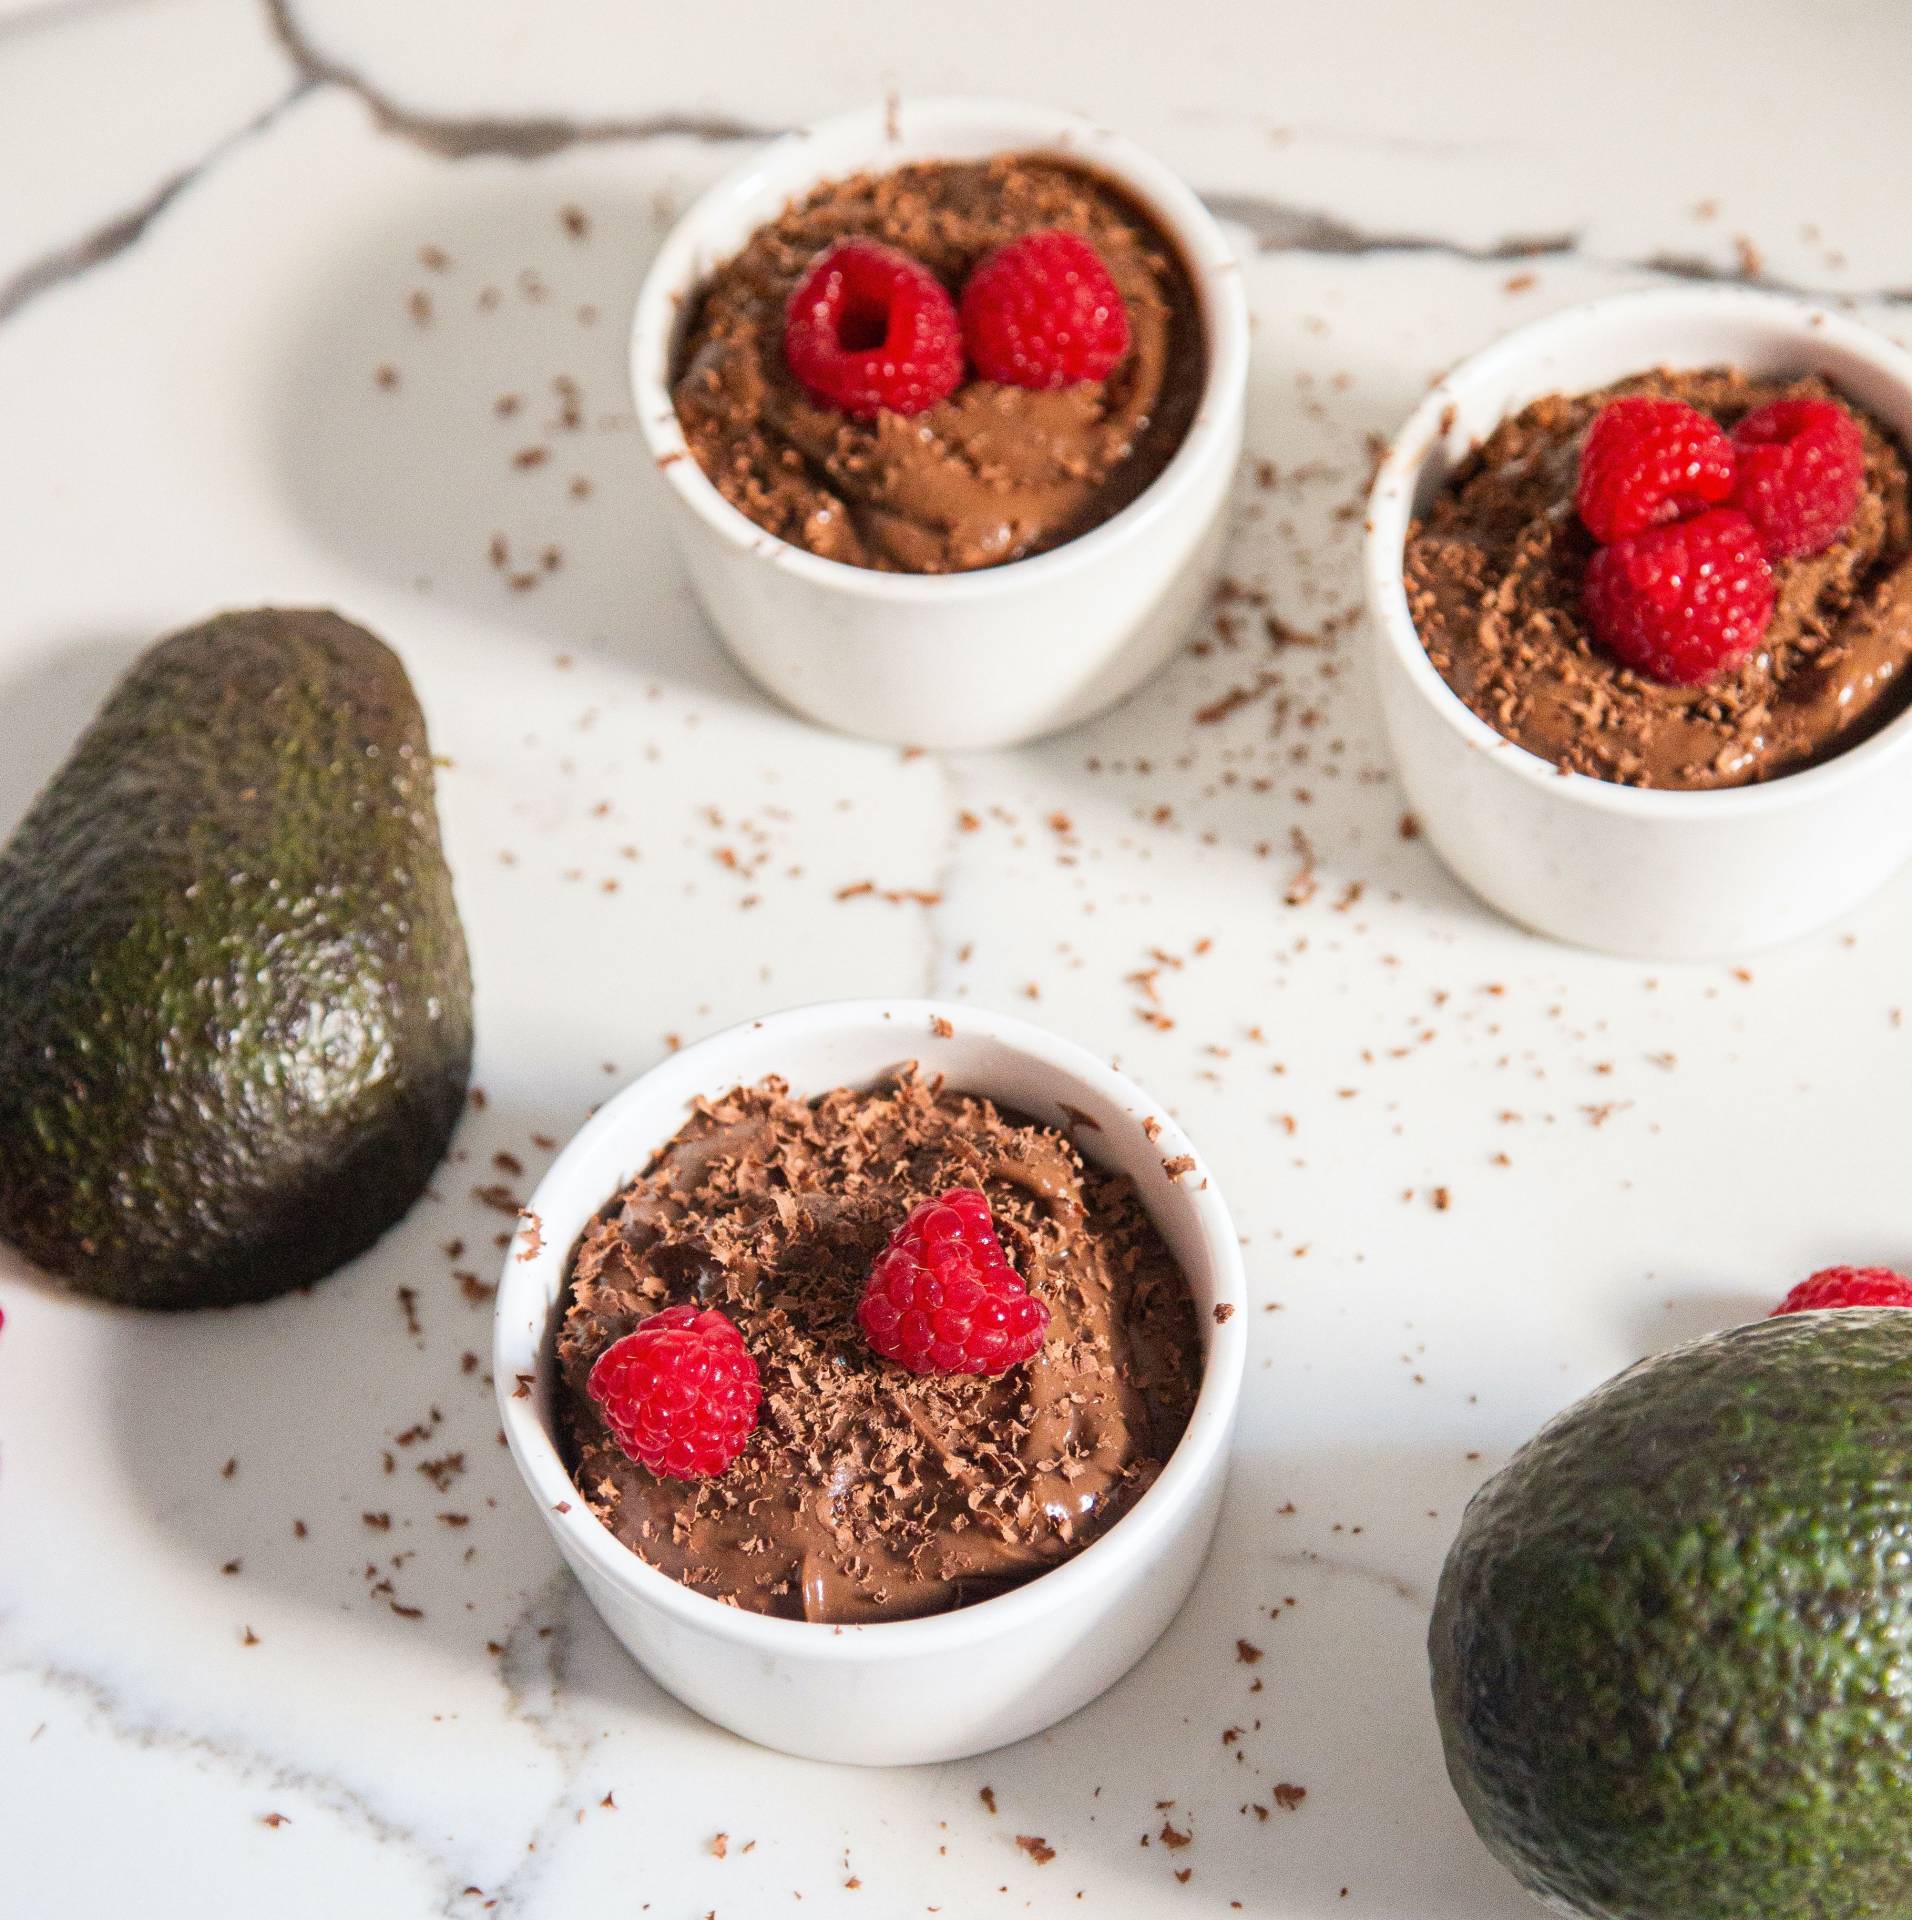 Chocolate Avocado Mousse - A Better Choice